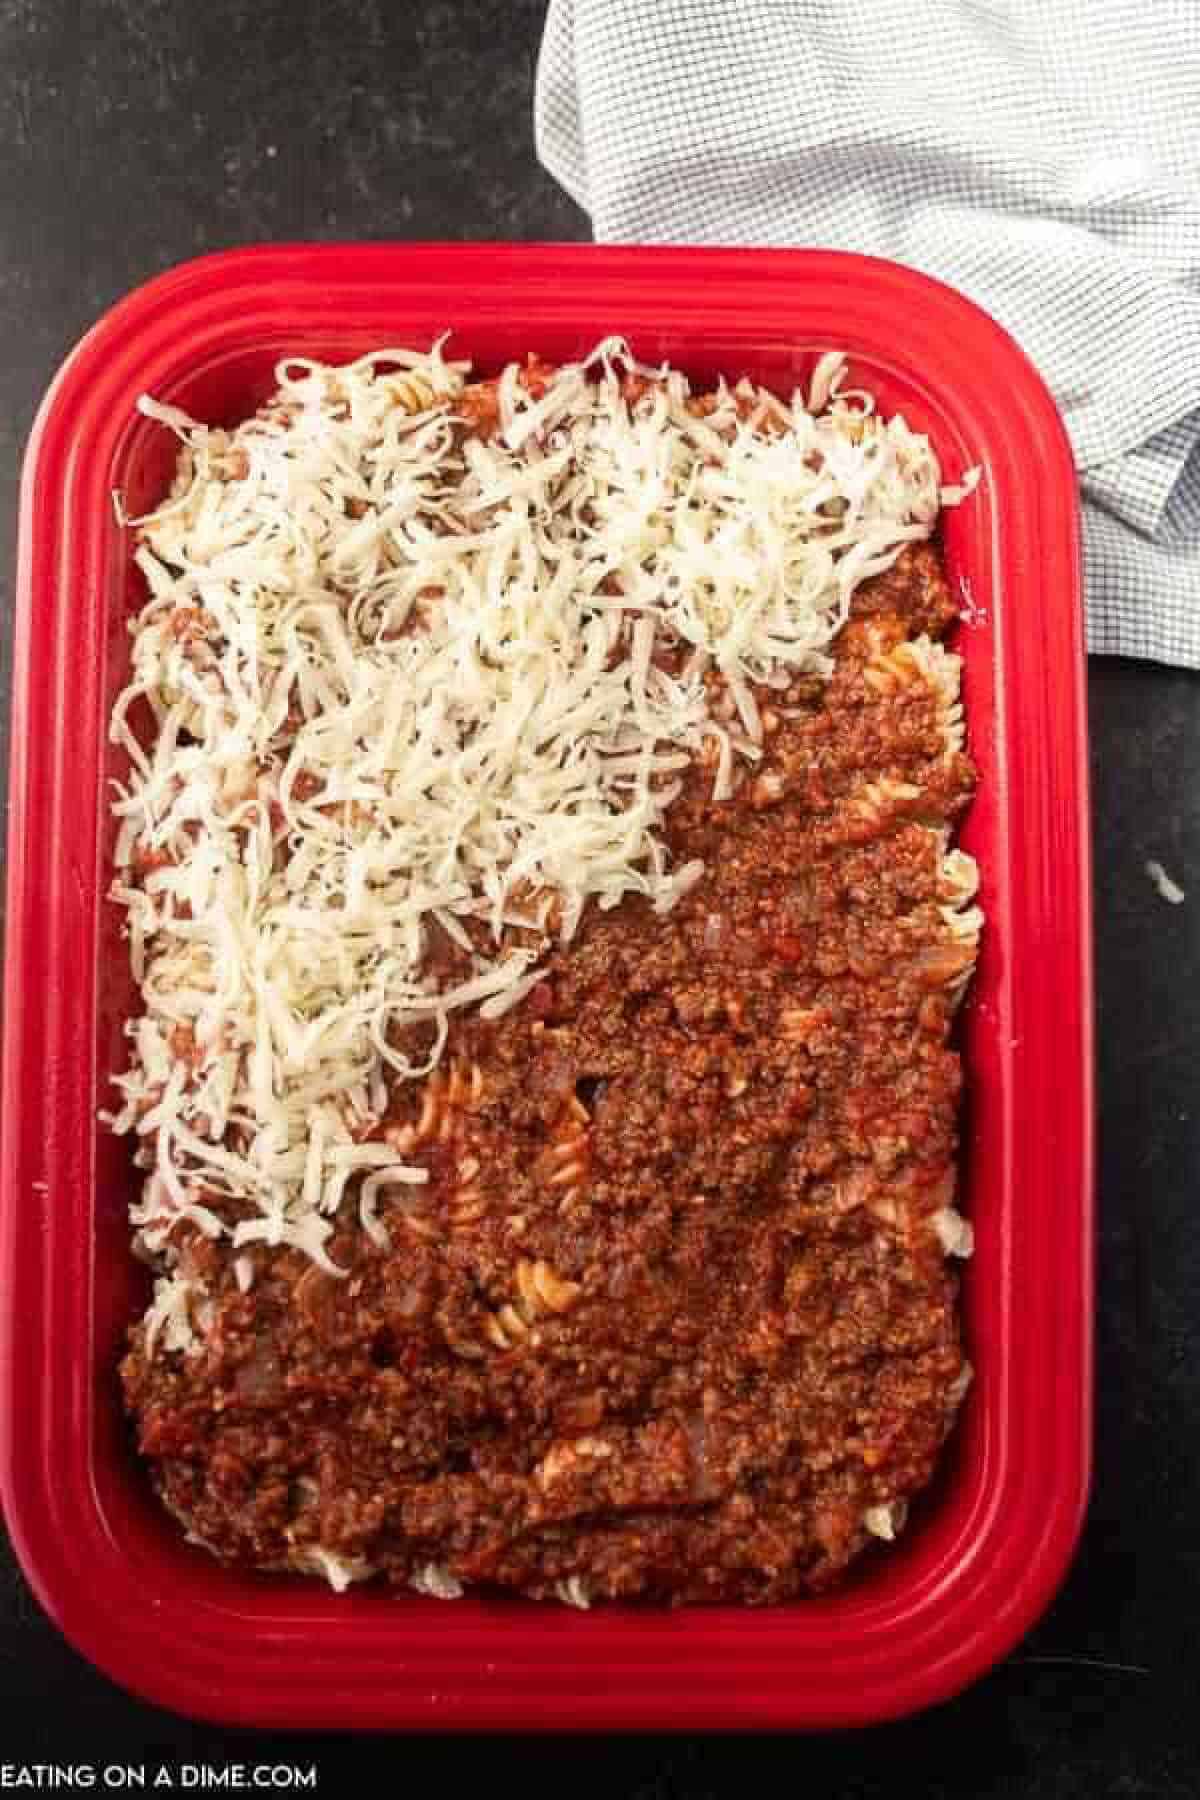 Shredded cheese top the meat sauce in the red casserole dish